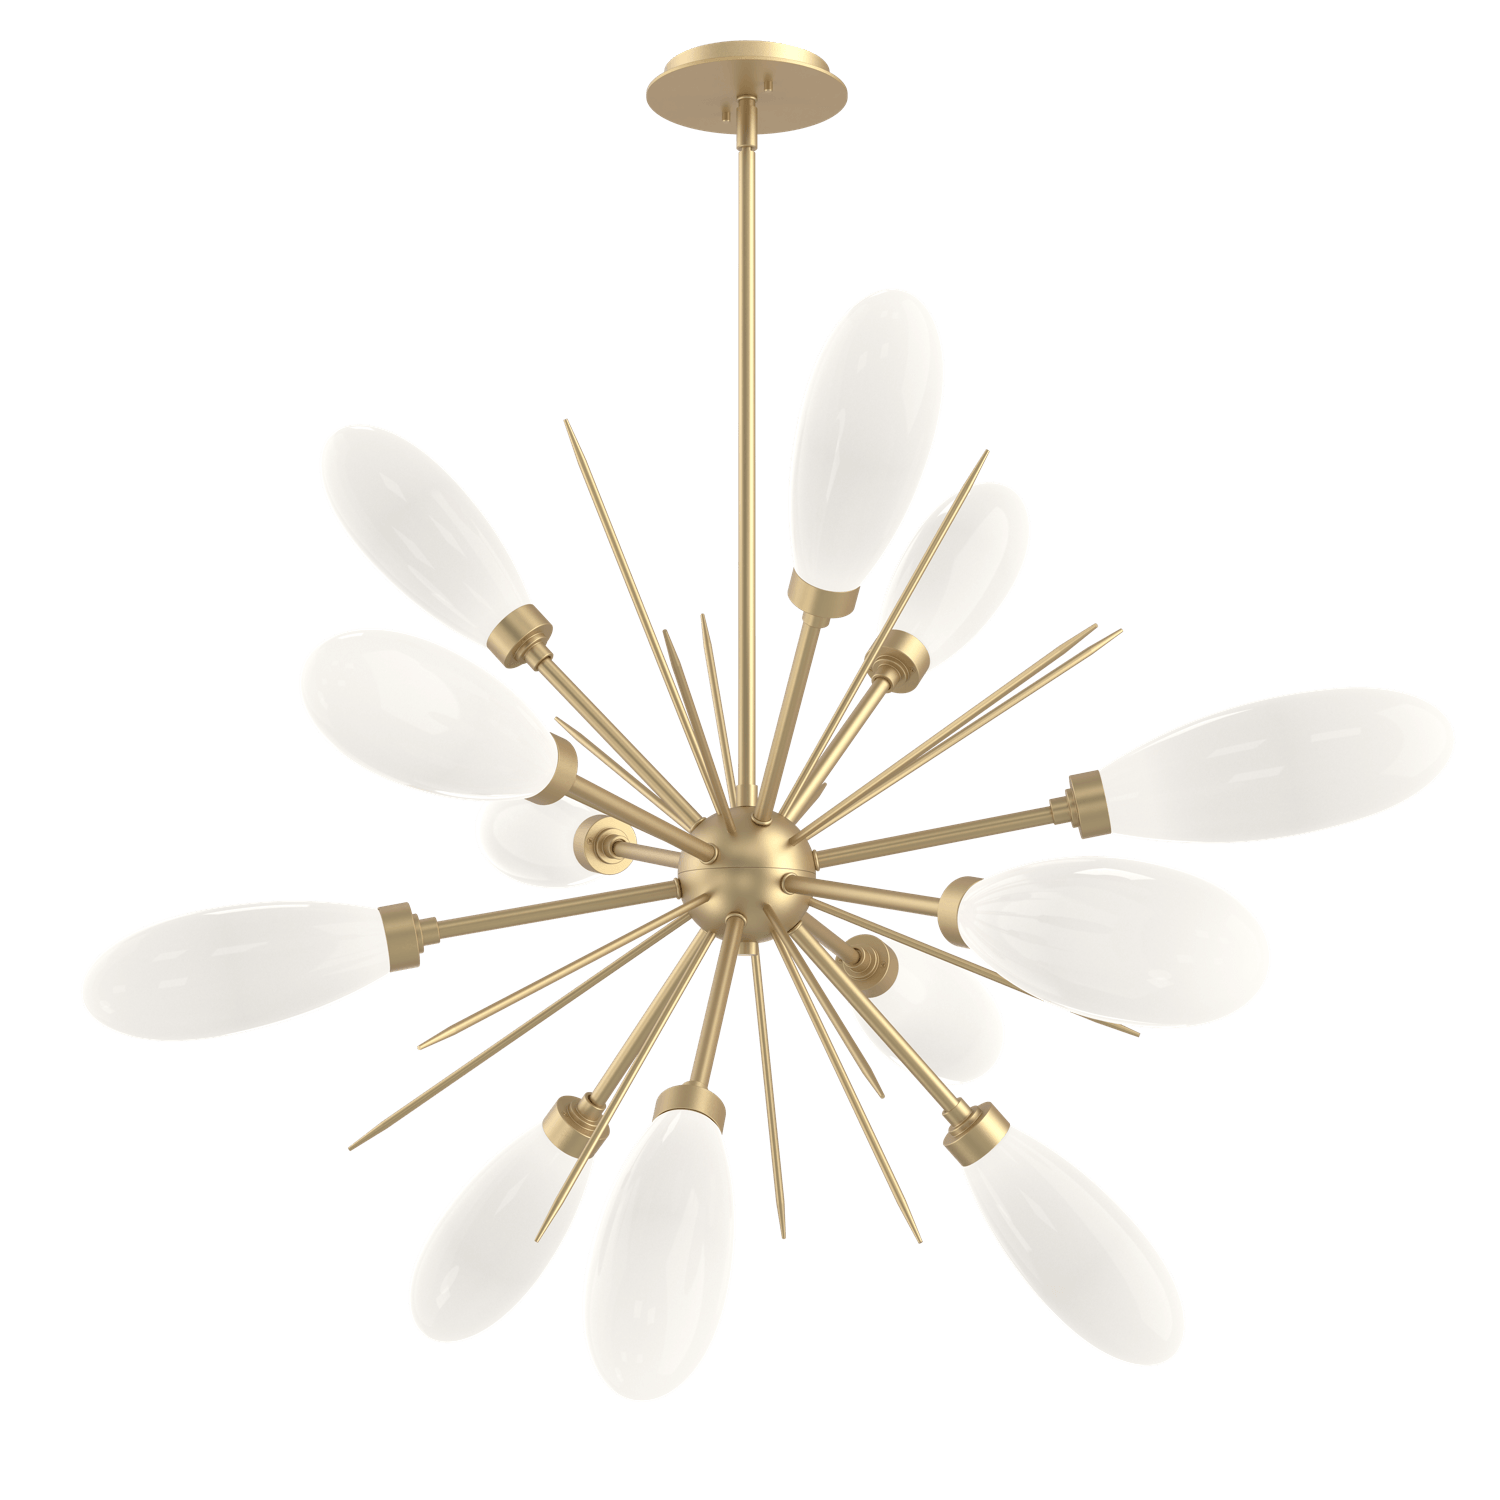 CHB0071-0A-GB-WL-LL-Hammerton-Studio-Fiori-34-inch-starburst-chandelier-with-gilded-brass-finish-and-opal-white-glass-shades-and-LED-lamping